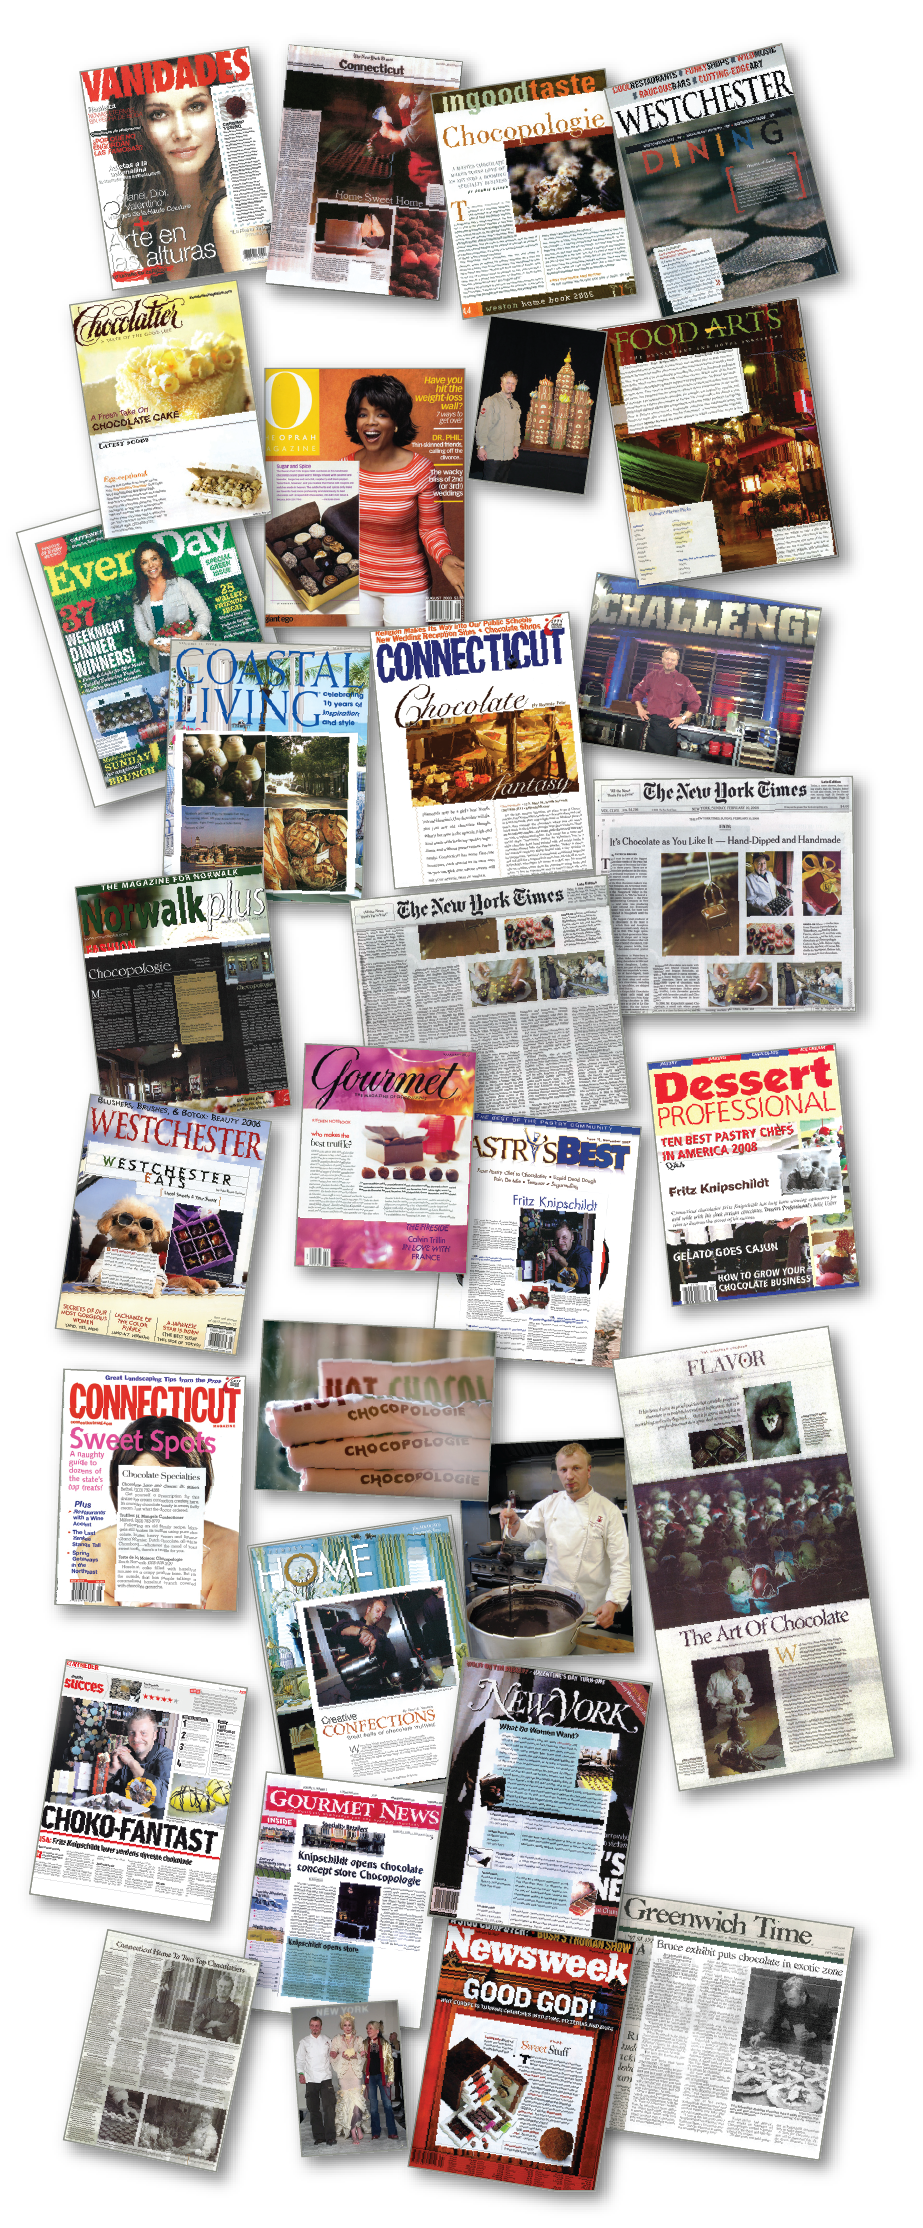 images of newspapers and magazines 